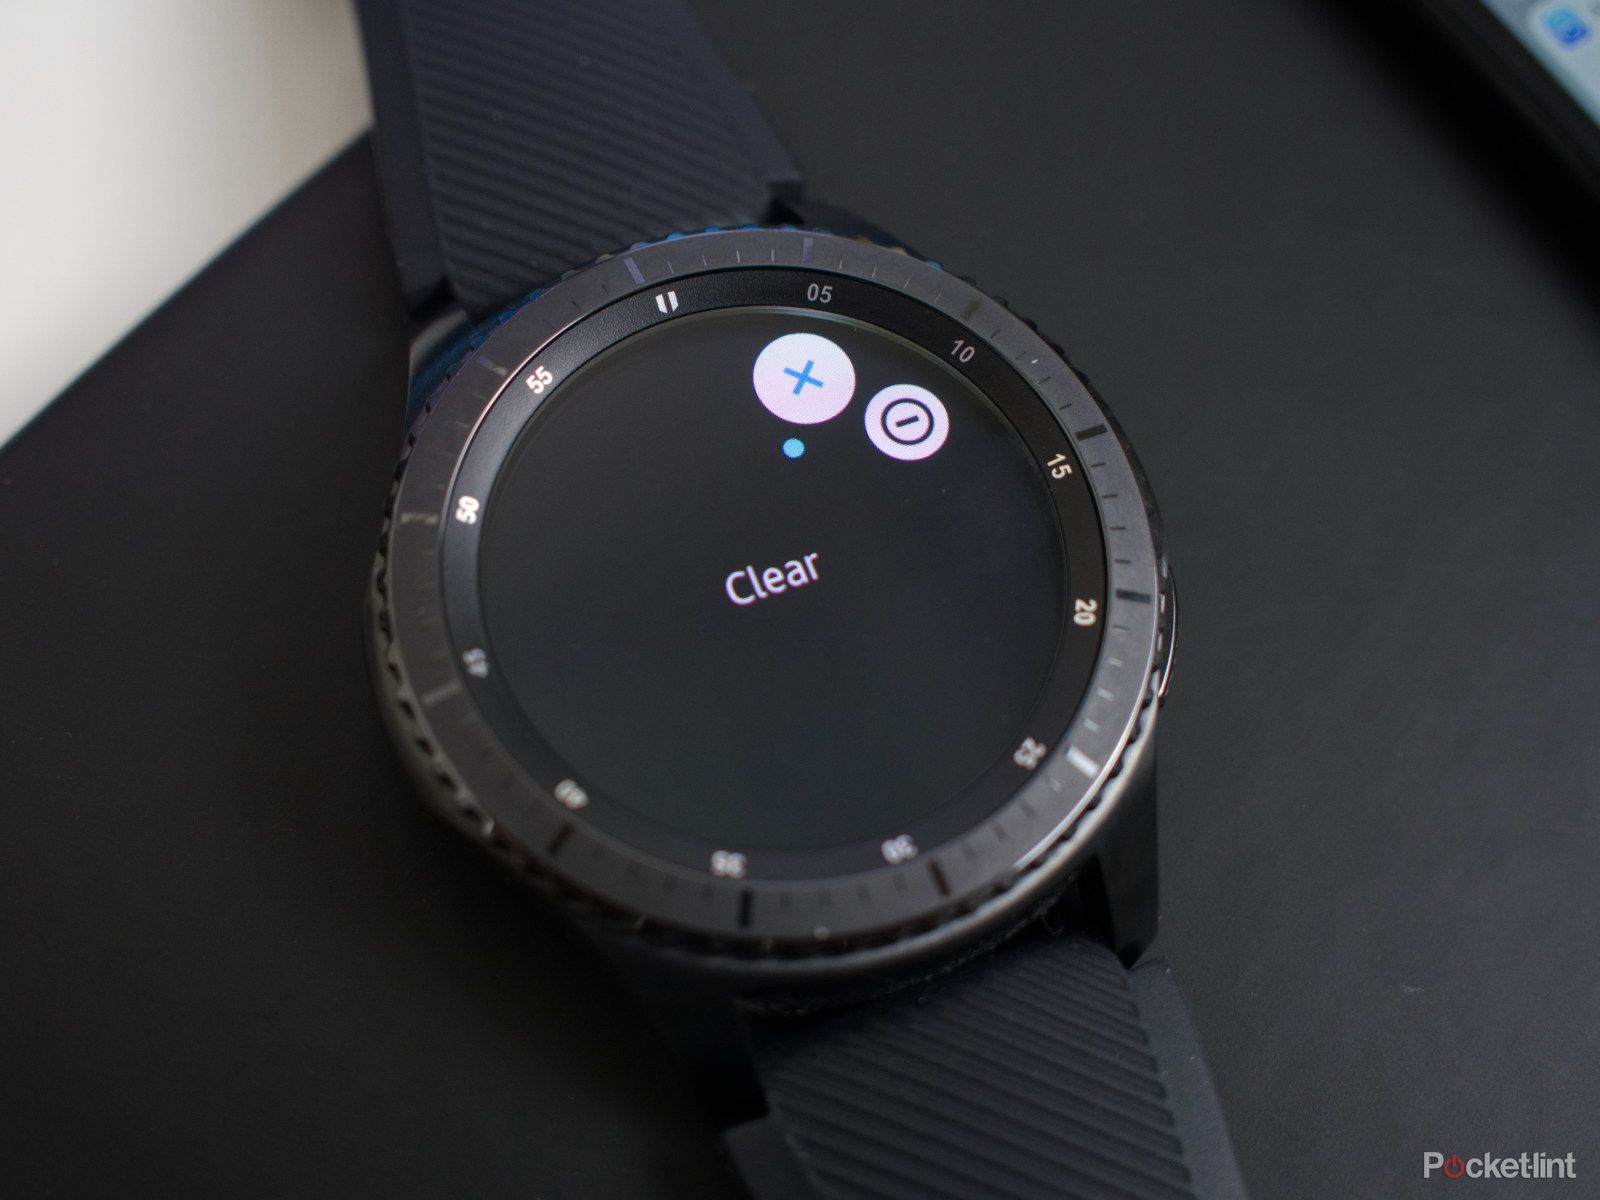 samsung gear s3 and gear s2 now connect to iphone here s how it works image 2